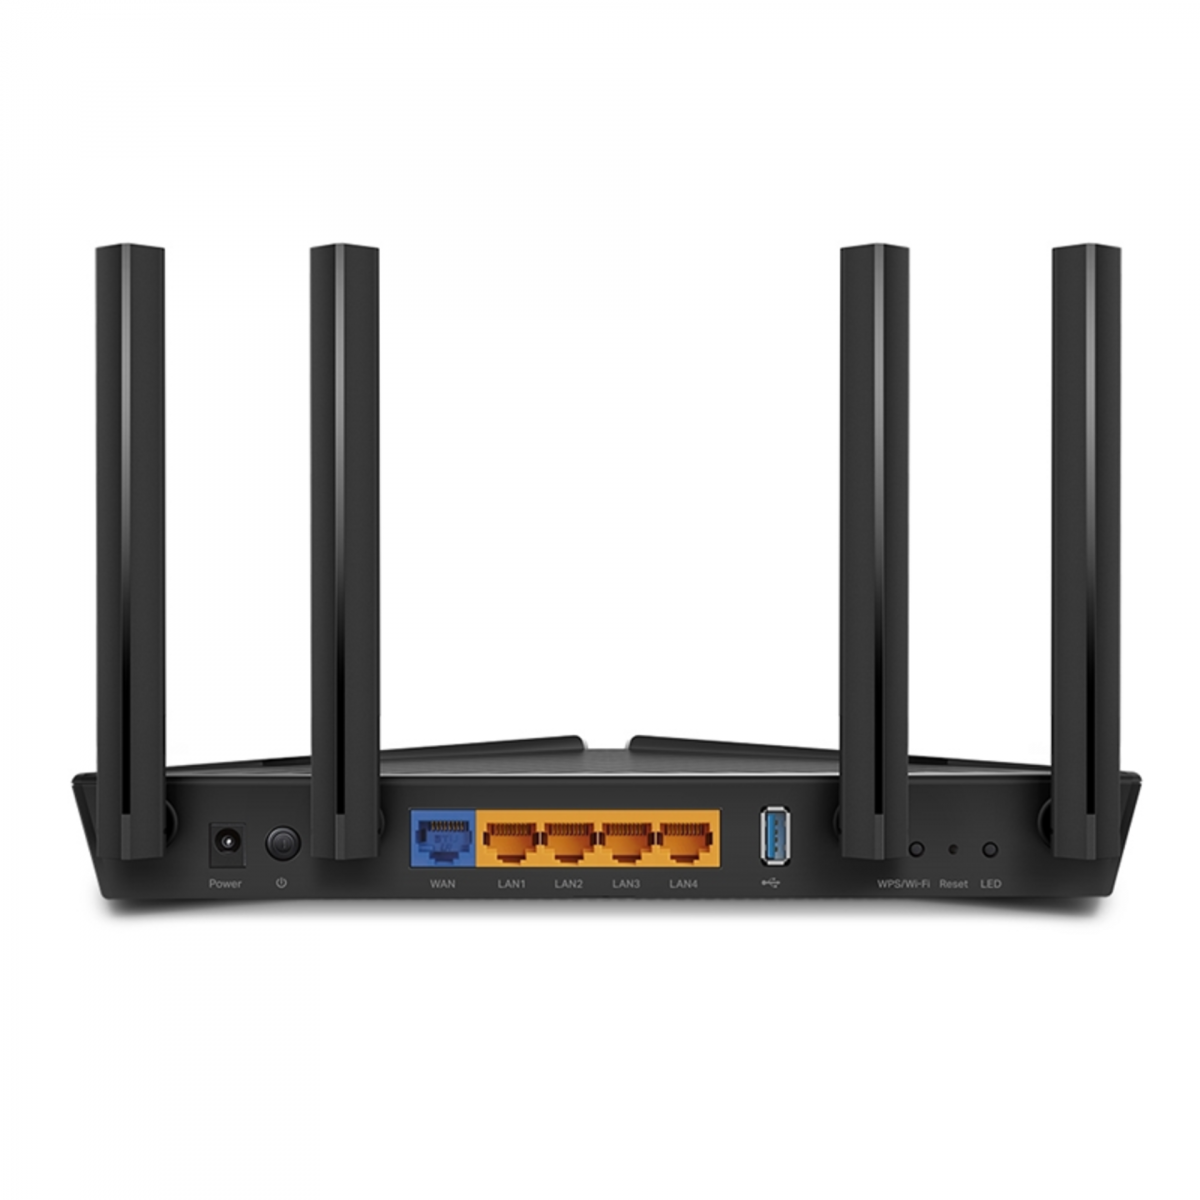 Маршрутизатор / Archer AX50 / AX3000 Dual Band Wireless Gigabit Router,Dual-Core CPU, 1 USB 3.0 Port